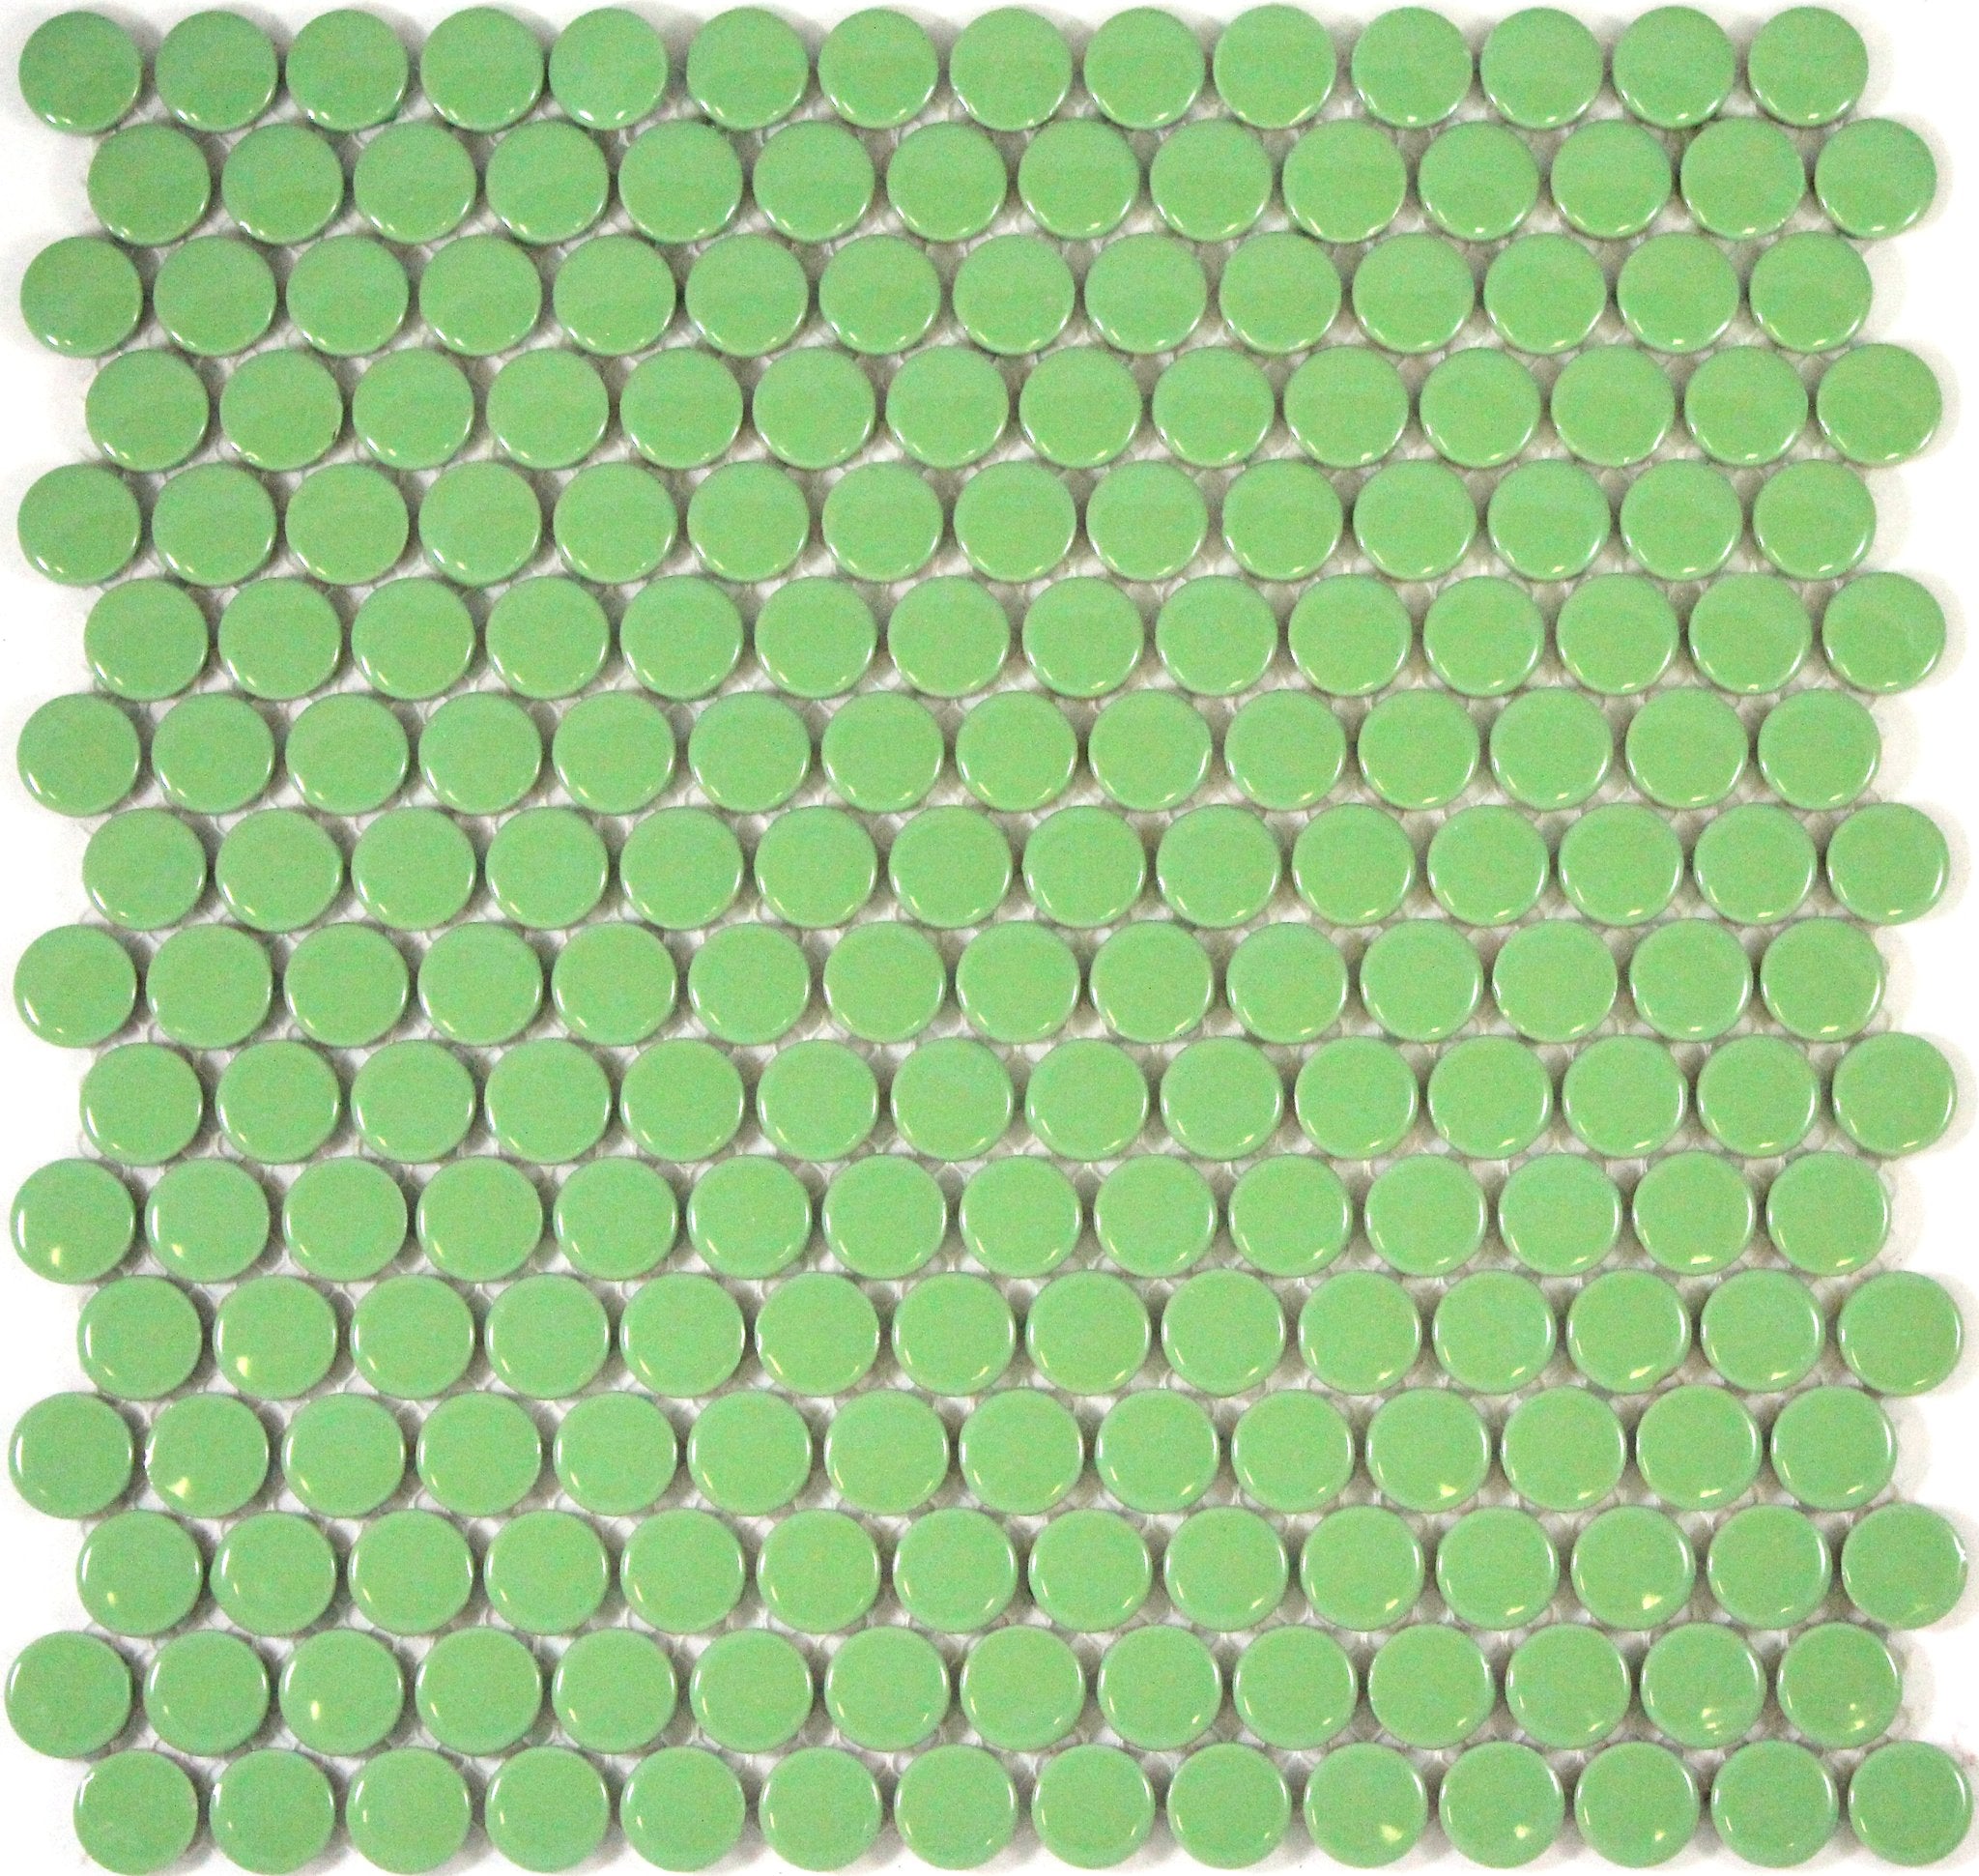 Green Gloss Penny Round Mosaic Tile 19mm